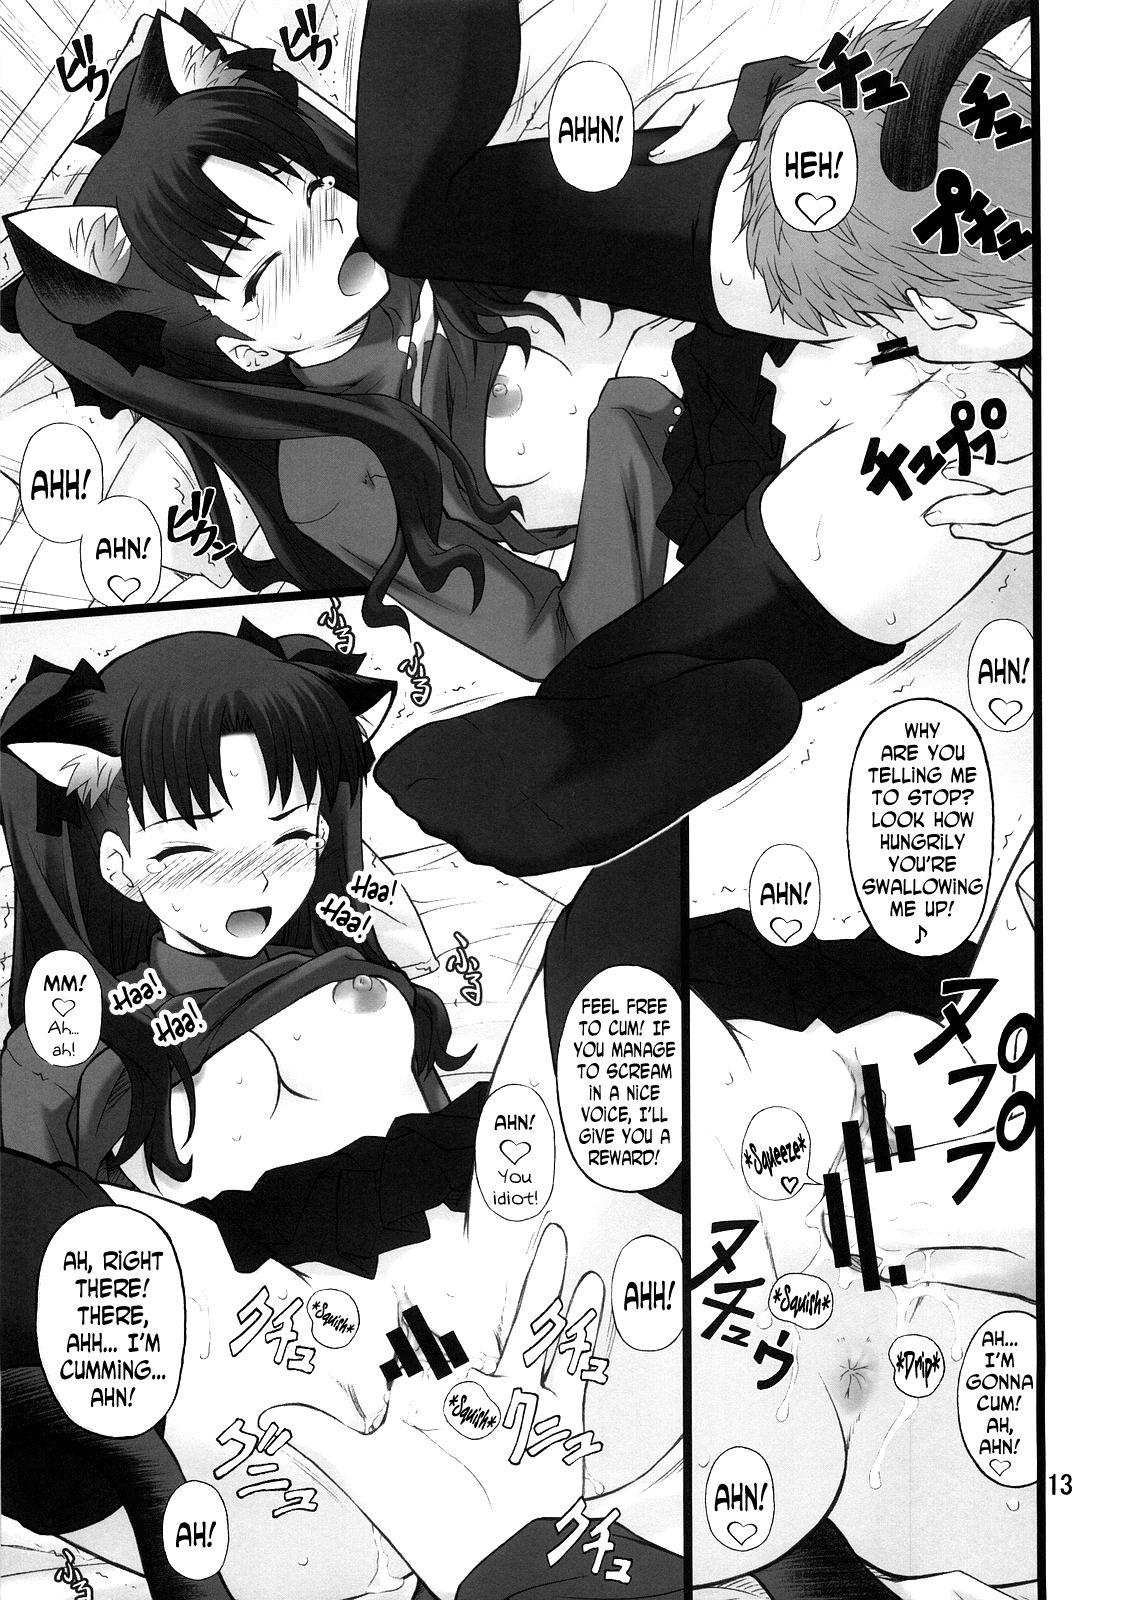 Gay Twinks Grem-Rin 1 - Fate stay night Anime - Page 12